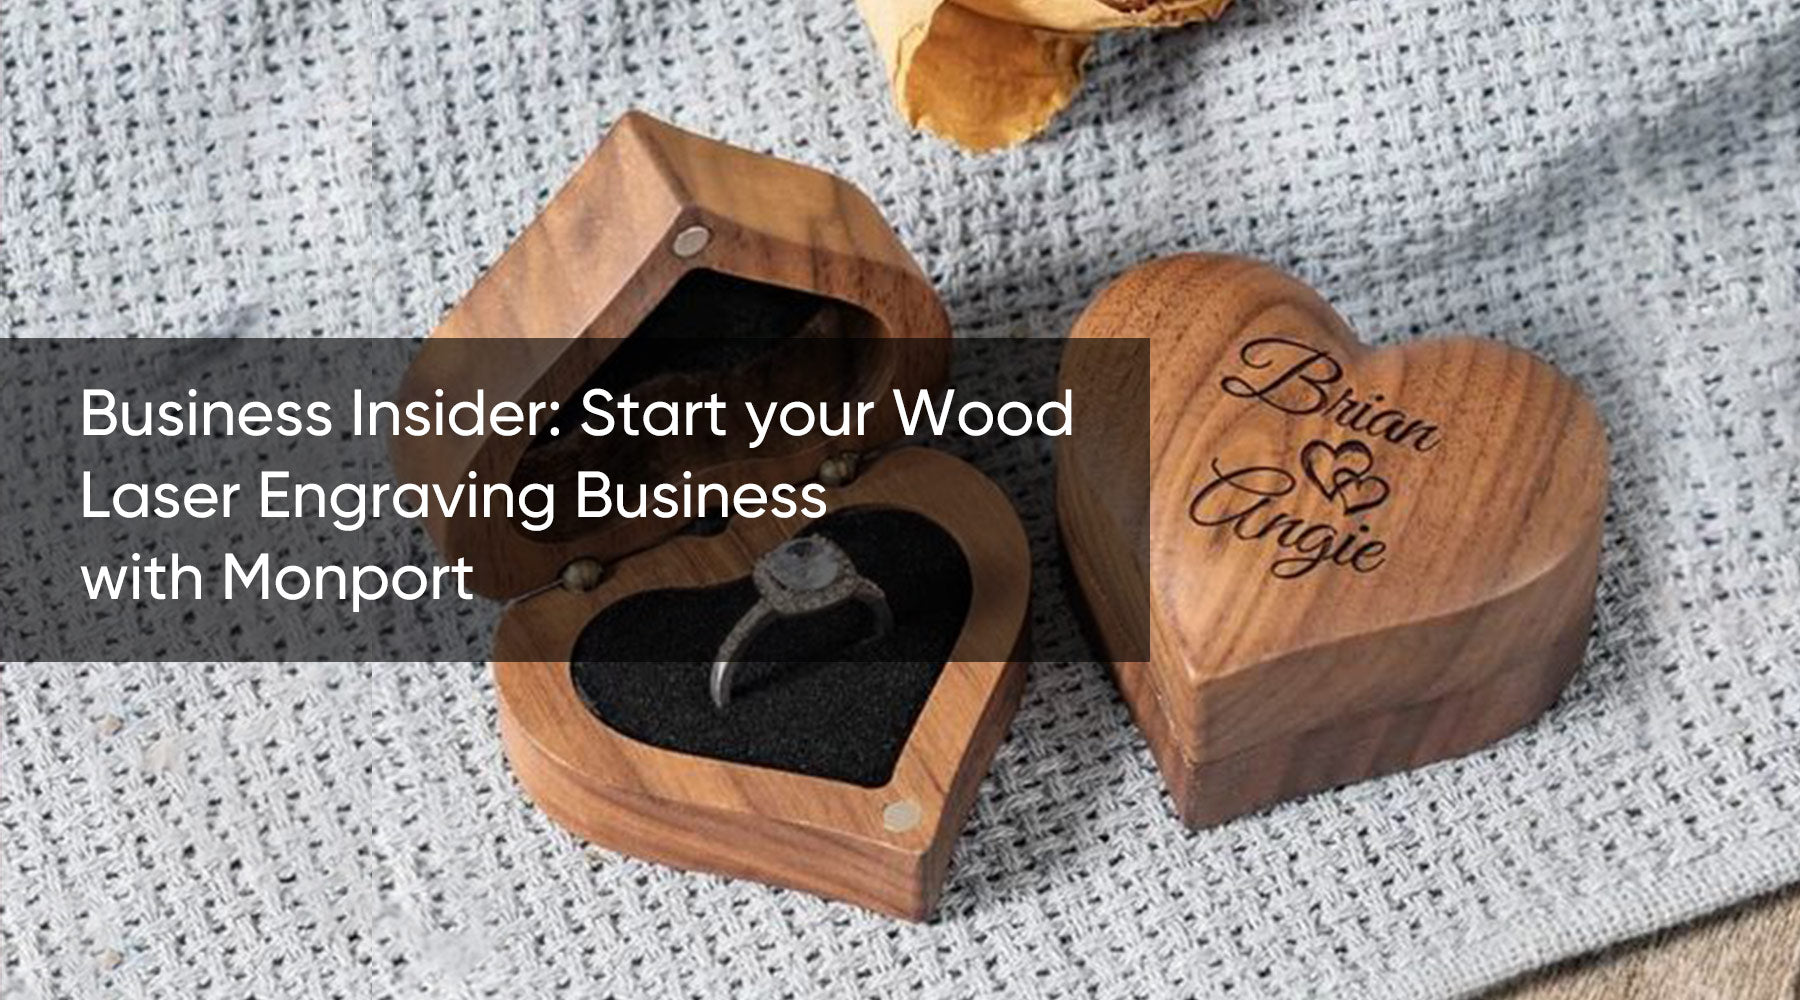 Start Engraving Onto Wood with Monport - Small Business Ideas